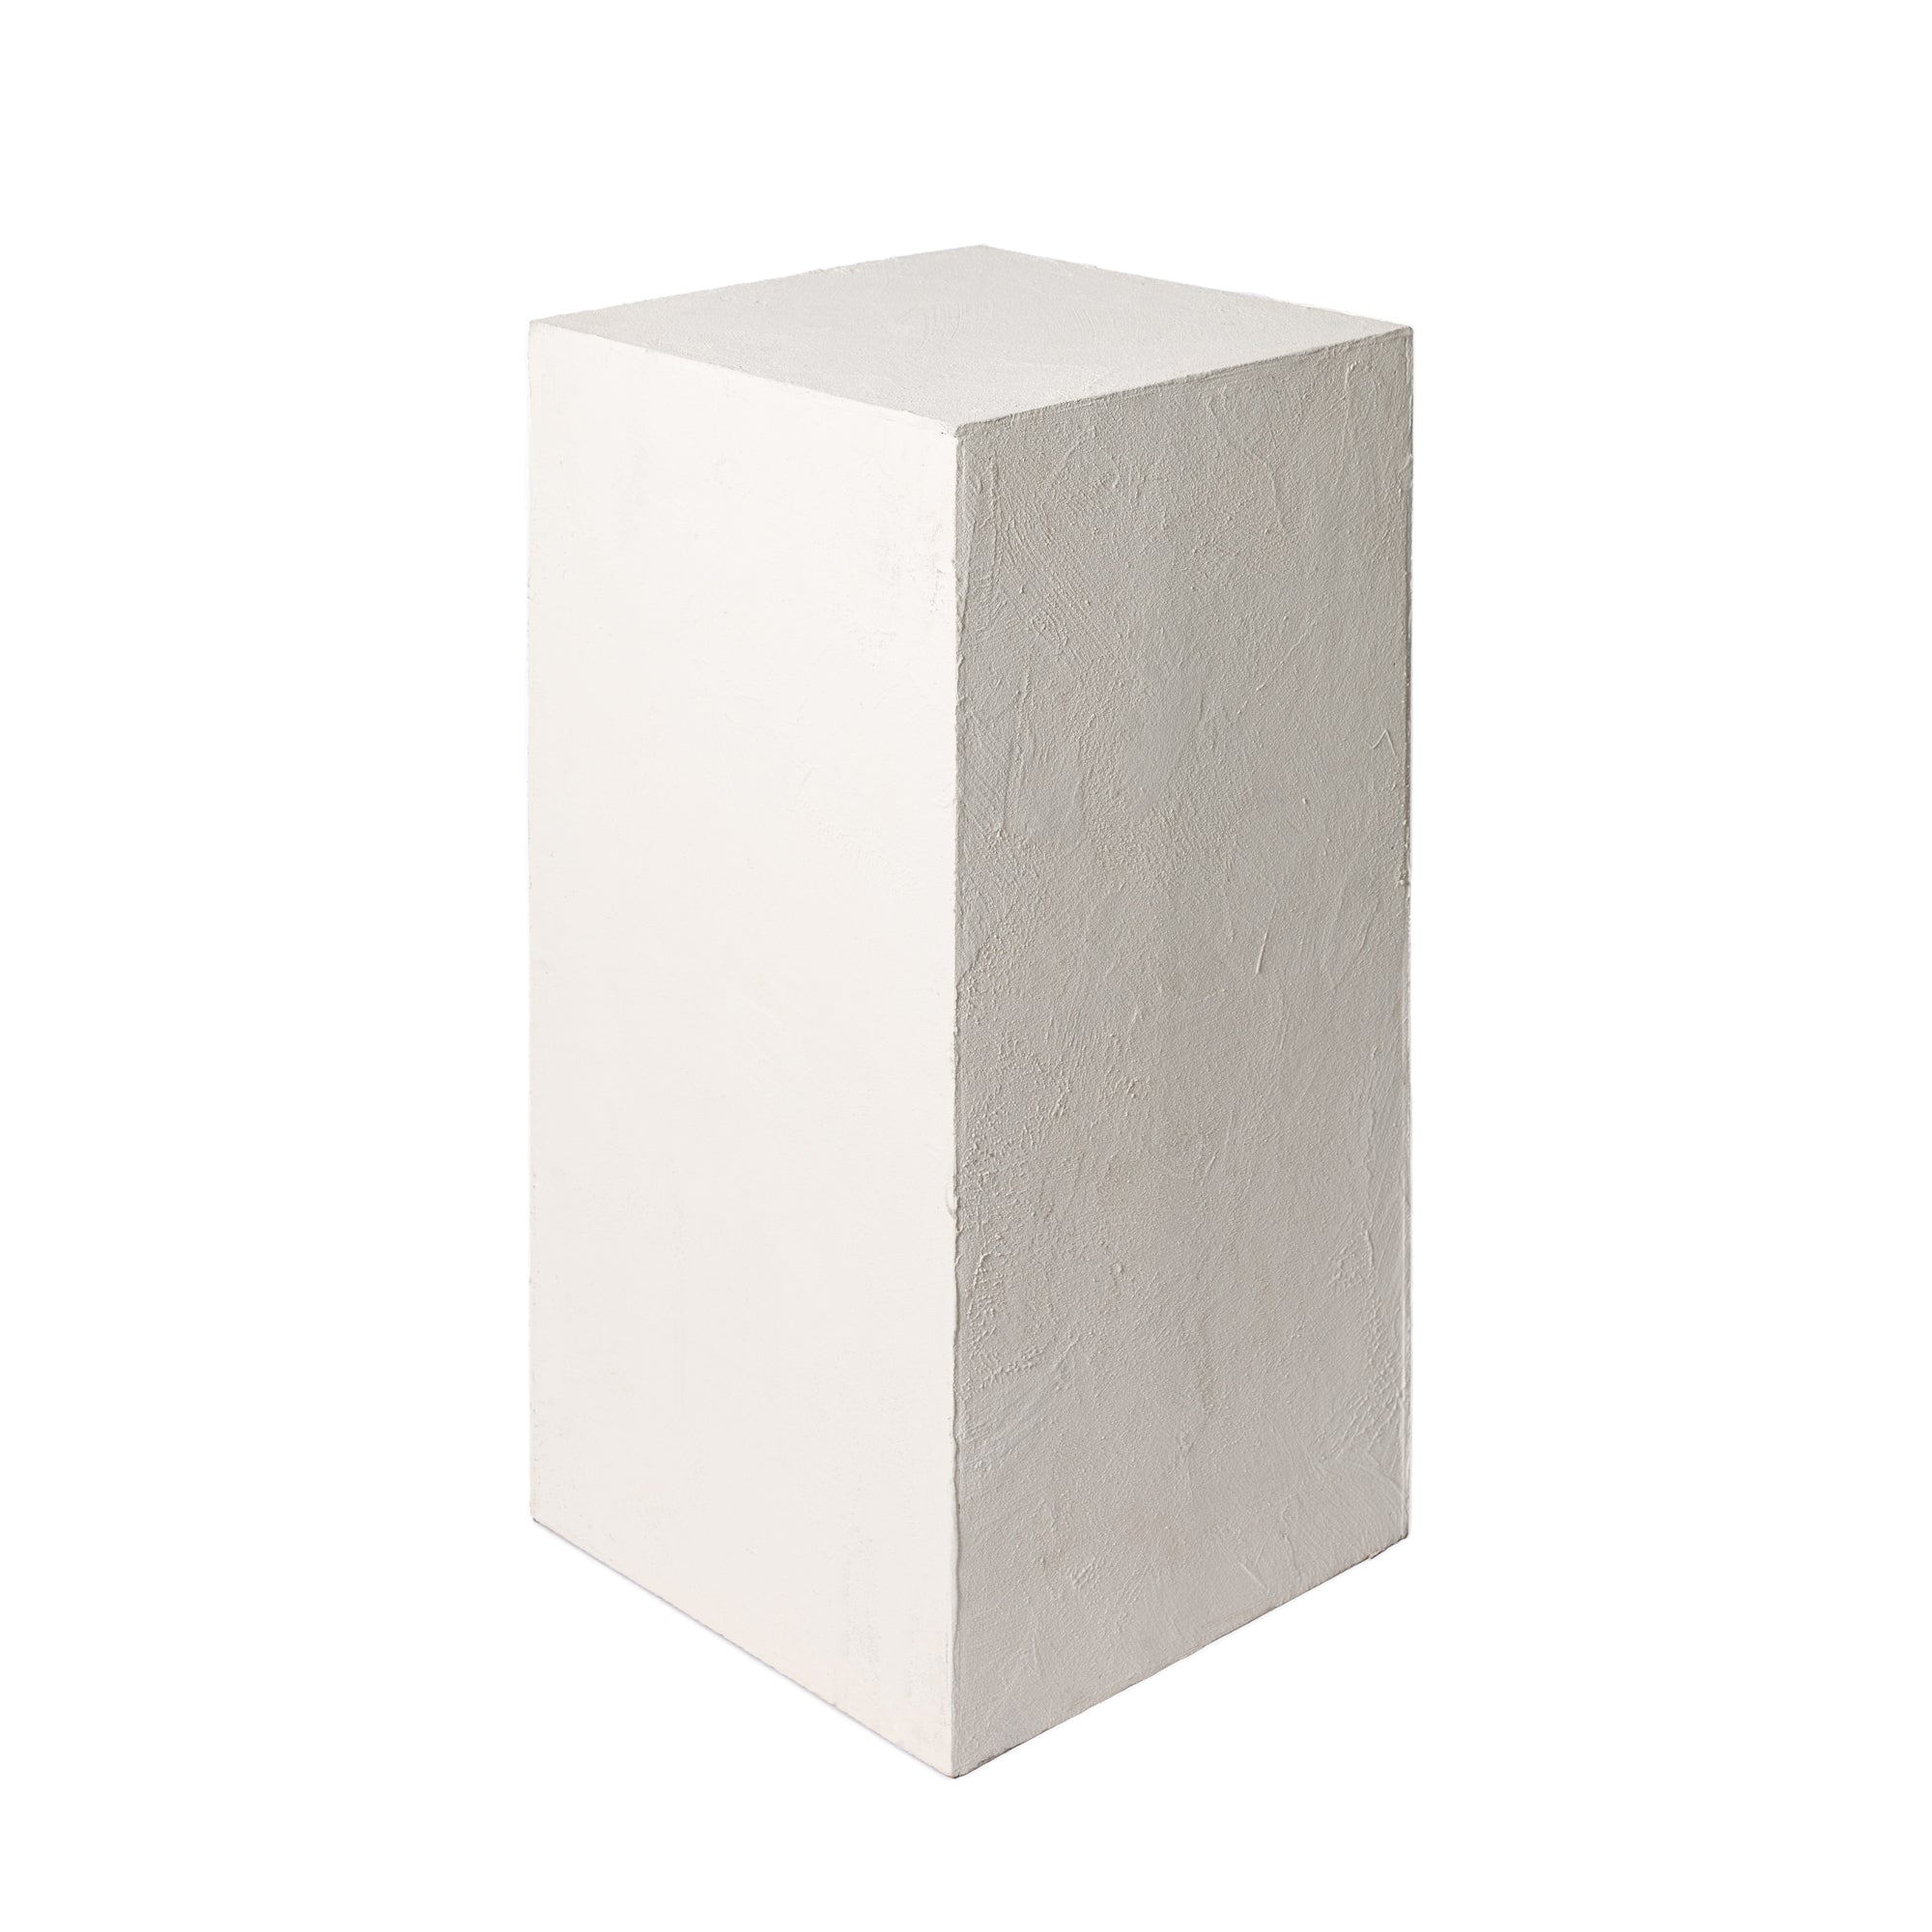 Textured Plinths Available For Hire. \For Love & Living Gold Coast Wedding & Event Hire